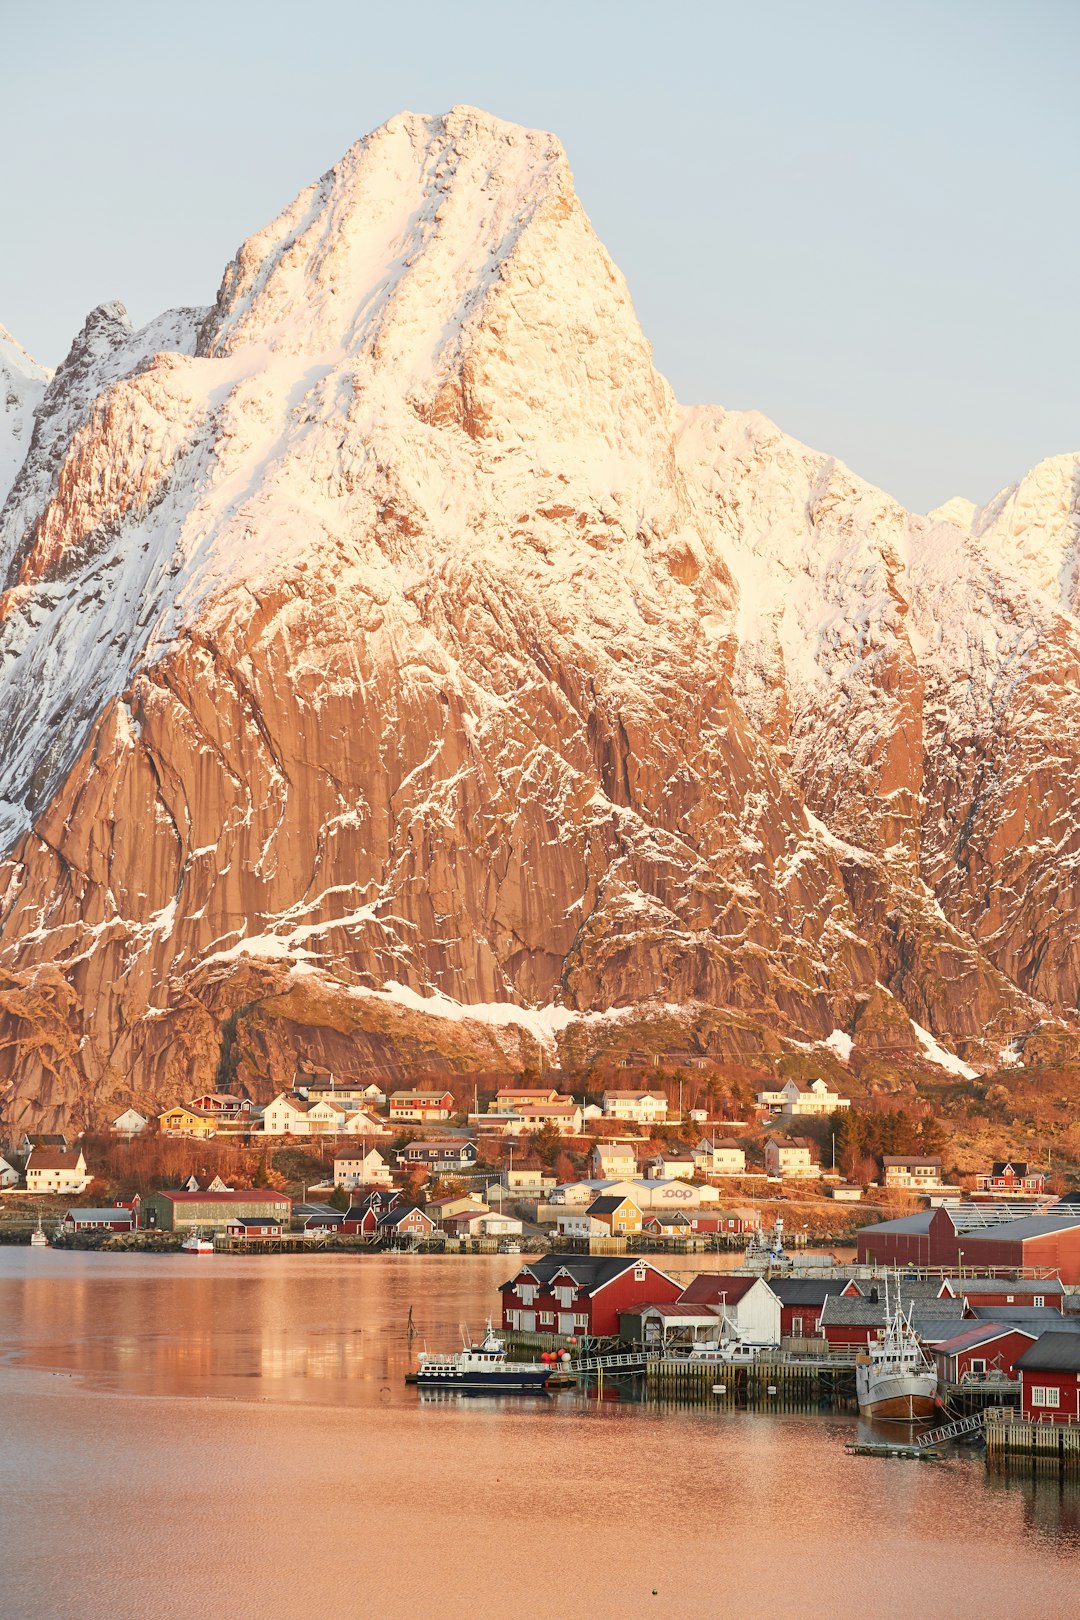 Travel Tips and Stories of Lofoten in Norway